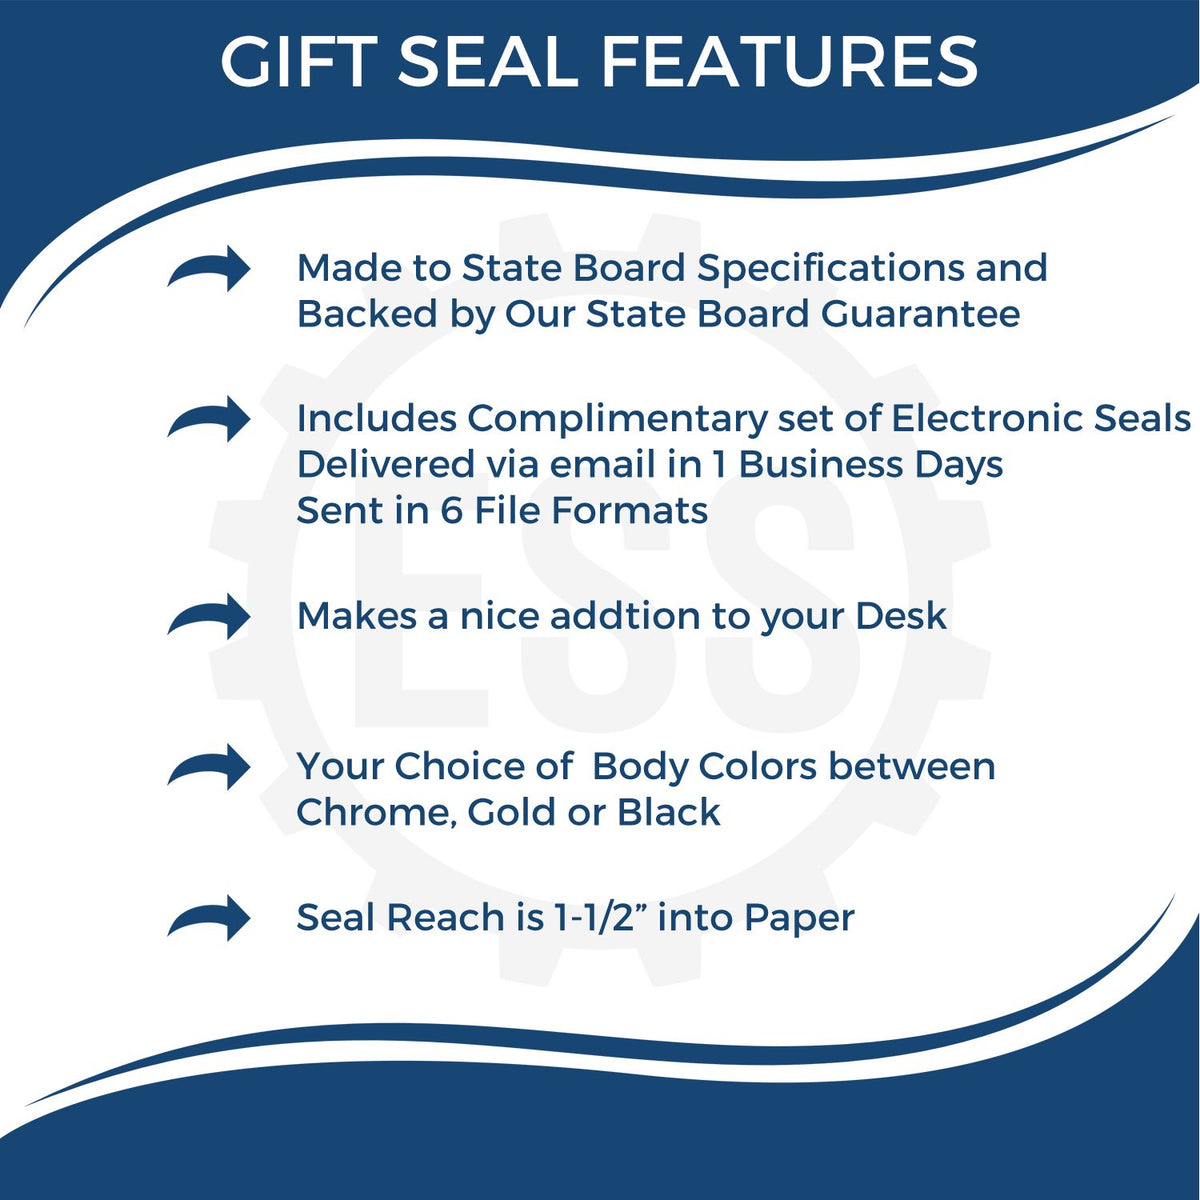 A picture of an infographic highlighting the selling points for the Gift Connecticut Engineer Seal